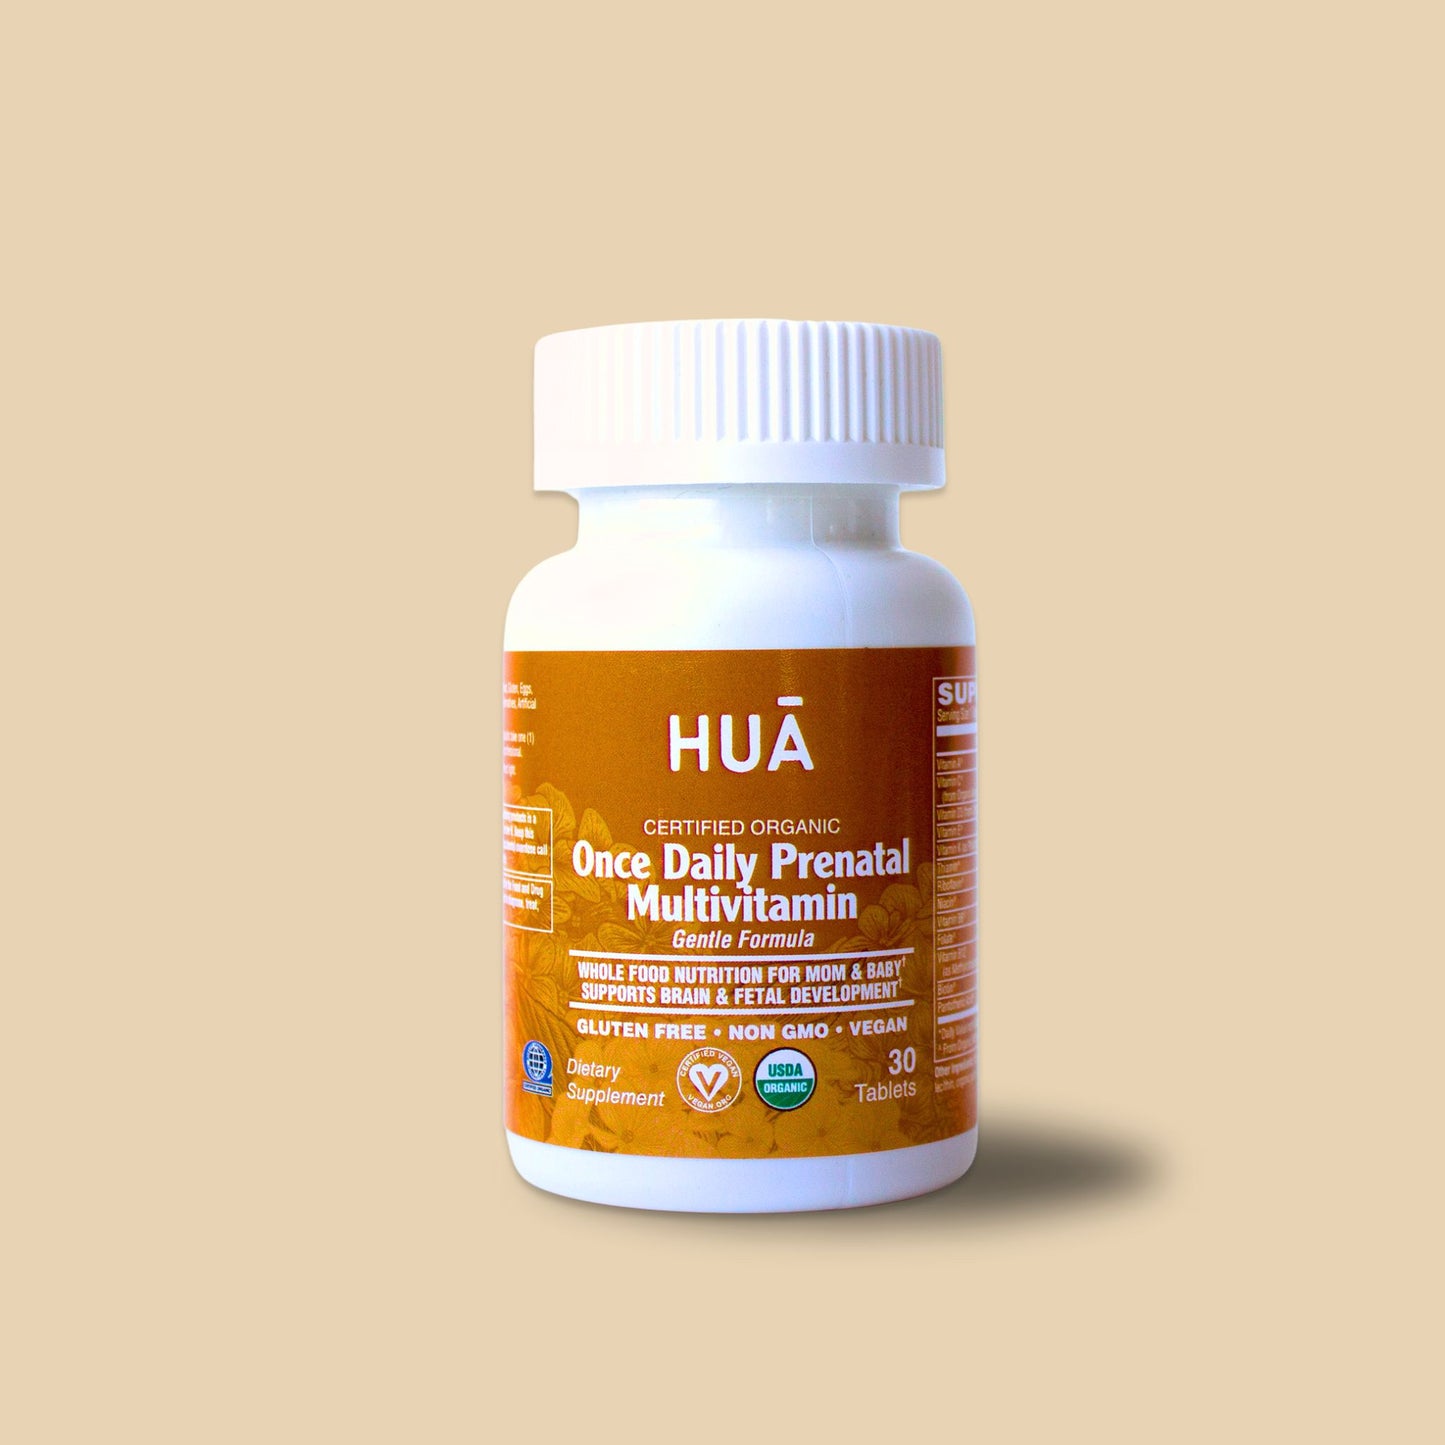 Main Product Image of HUA Wellness Once Daily Prenatal Multivitamin